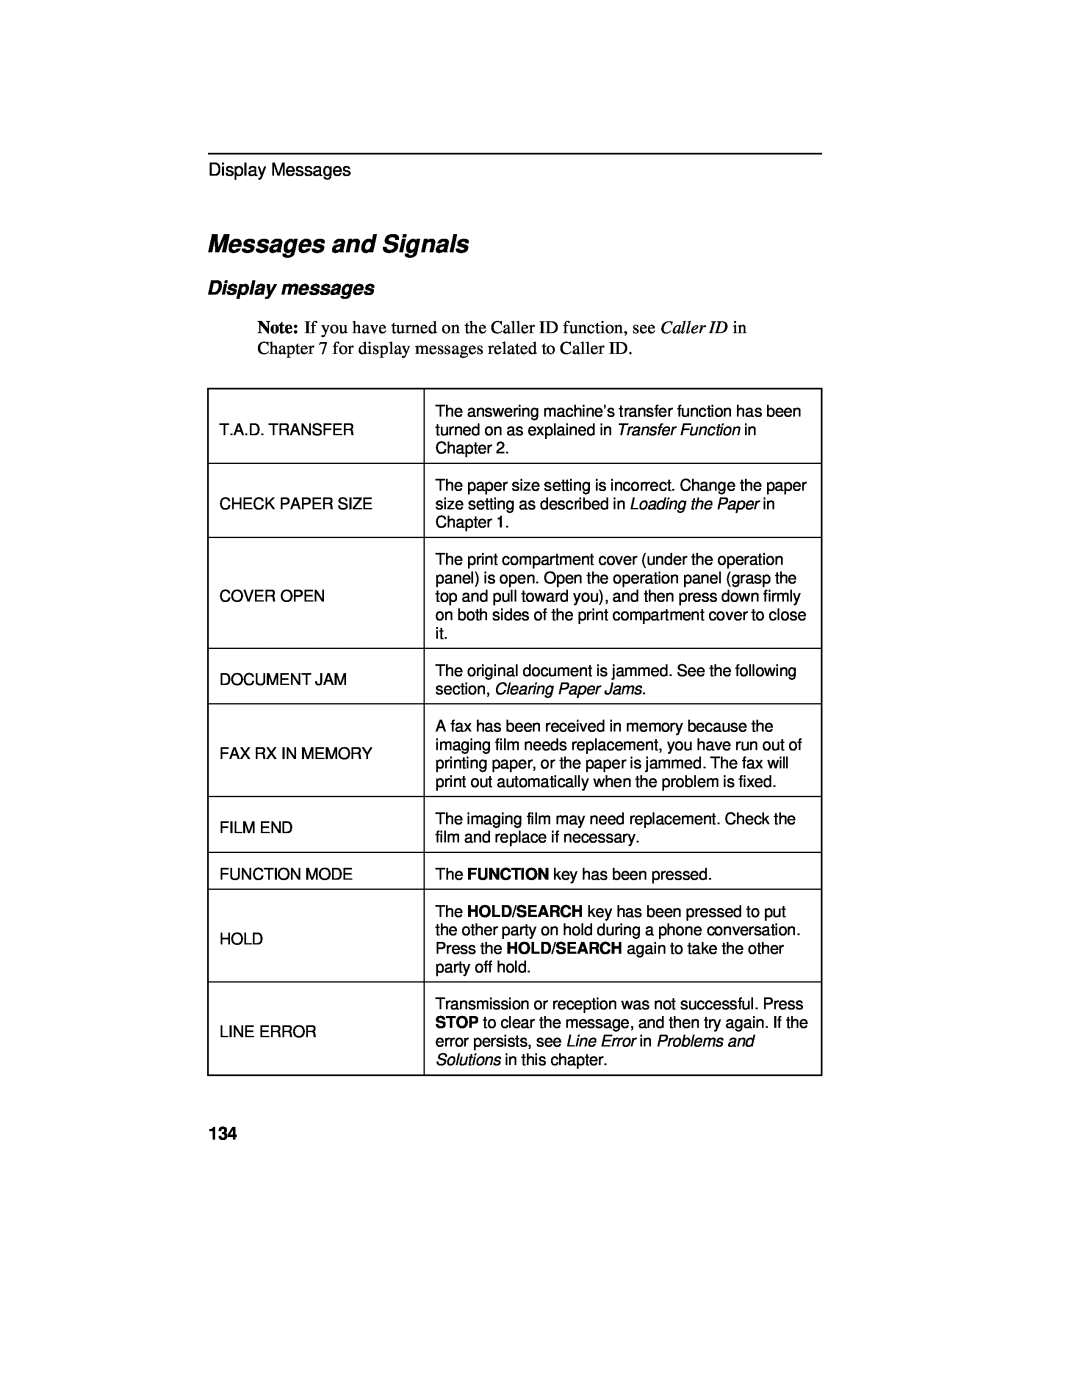 Sharp UX-460 operation manual Messages and Signals, Display messages, Display Messages, section, Clearing Paper Jams 